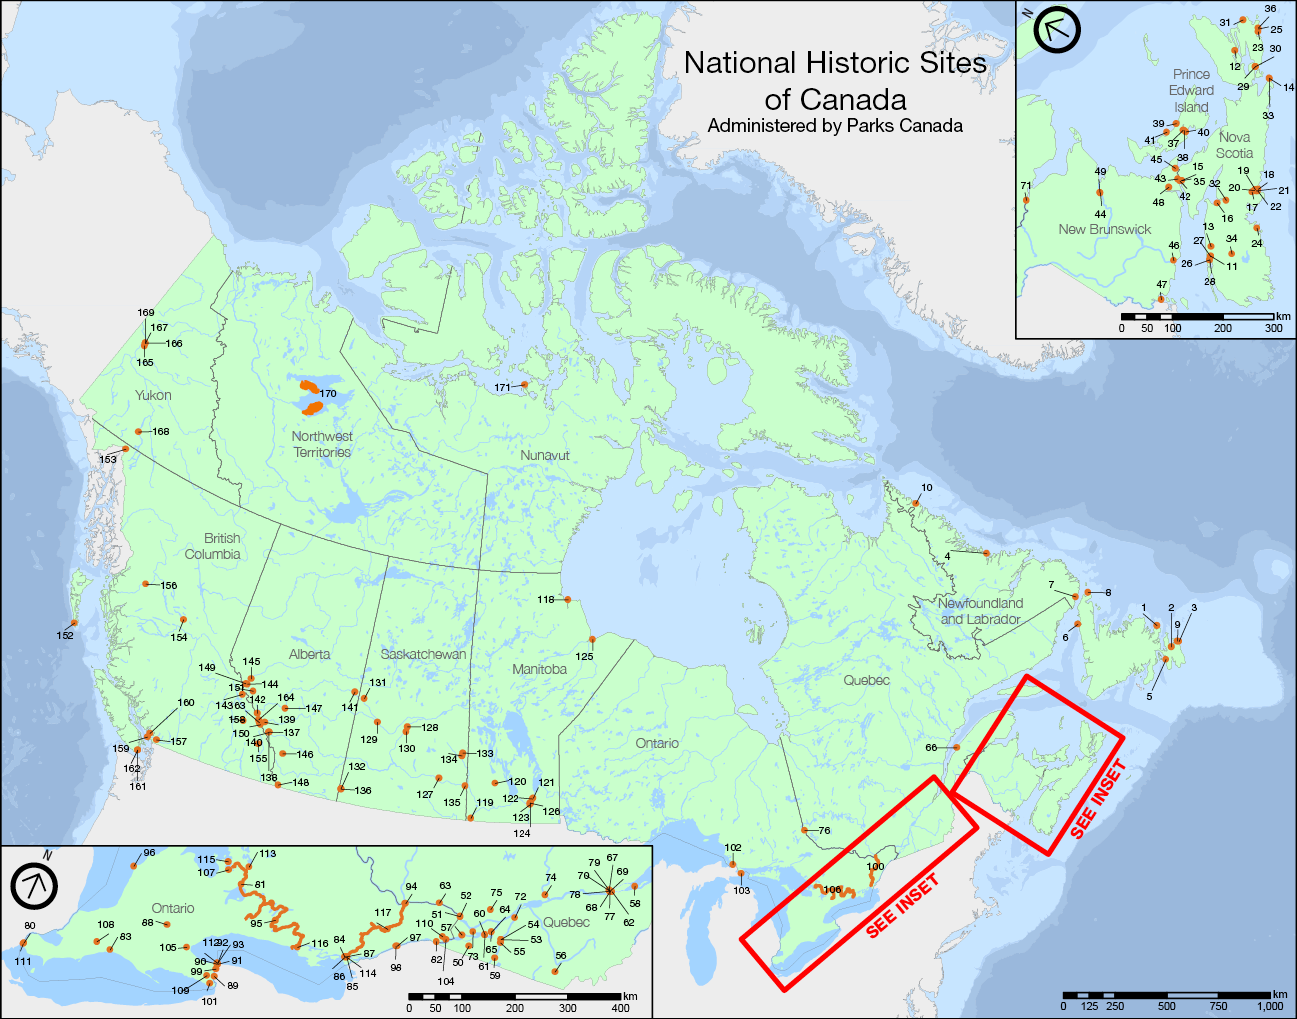 Figure 3: National Historic Sites of Canada Administered by Parks Canada